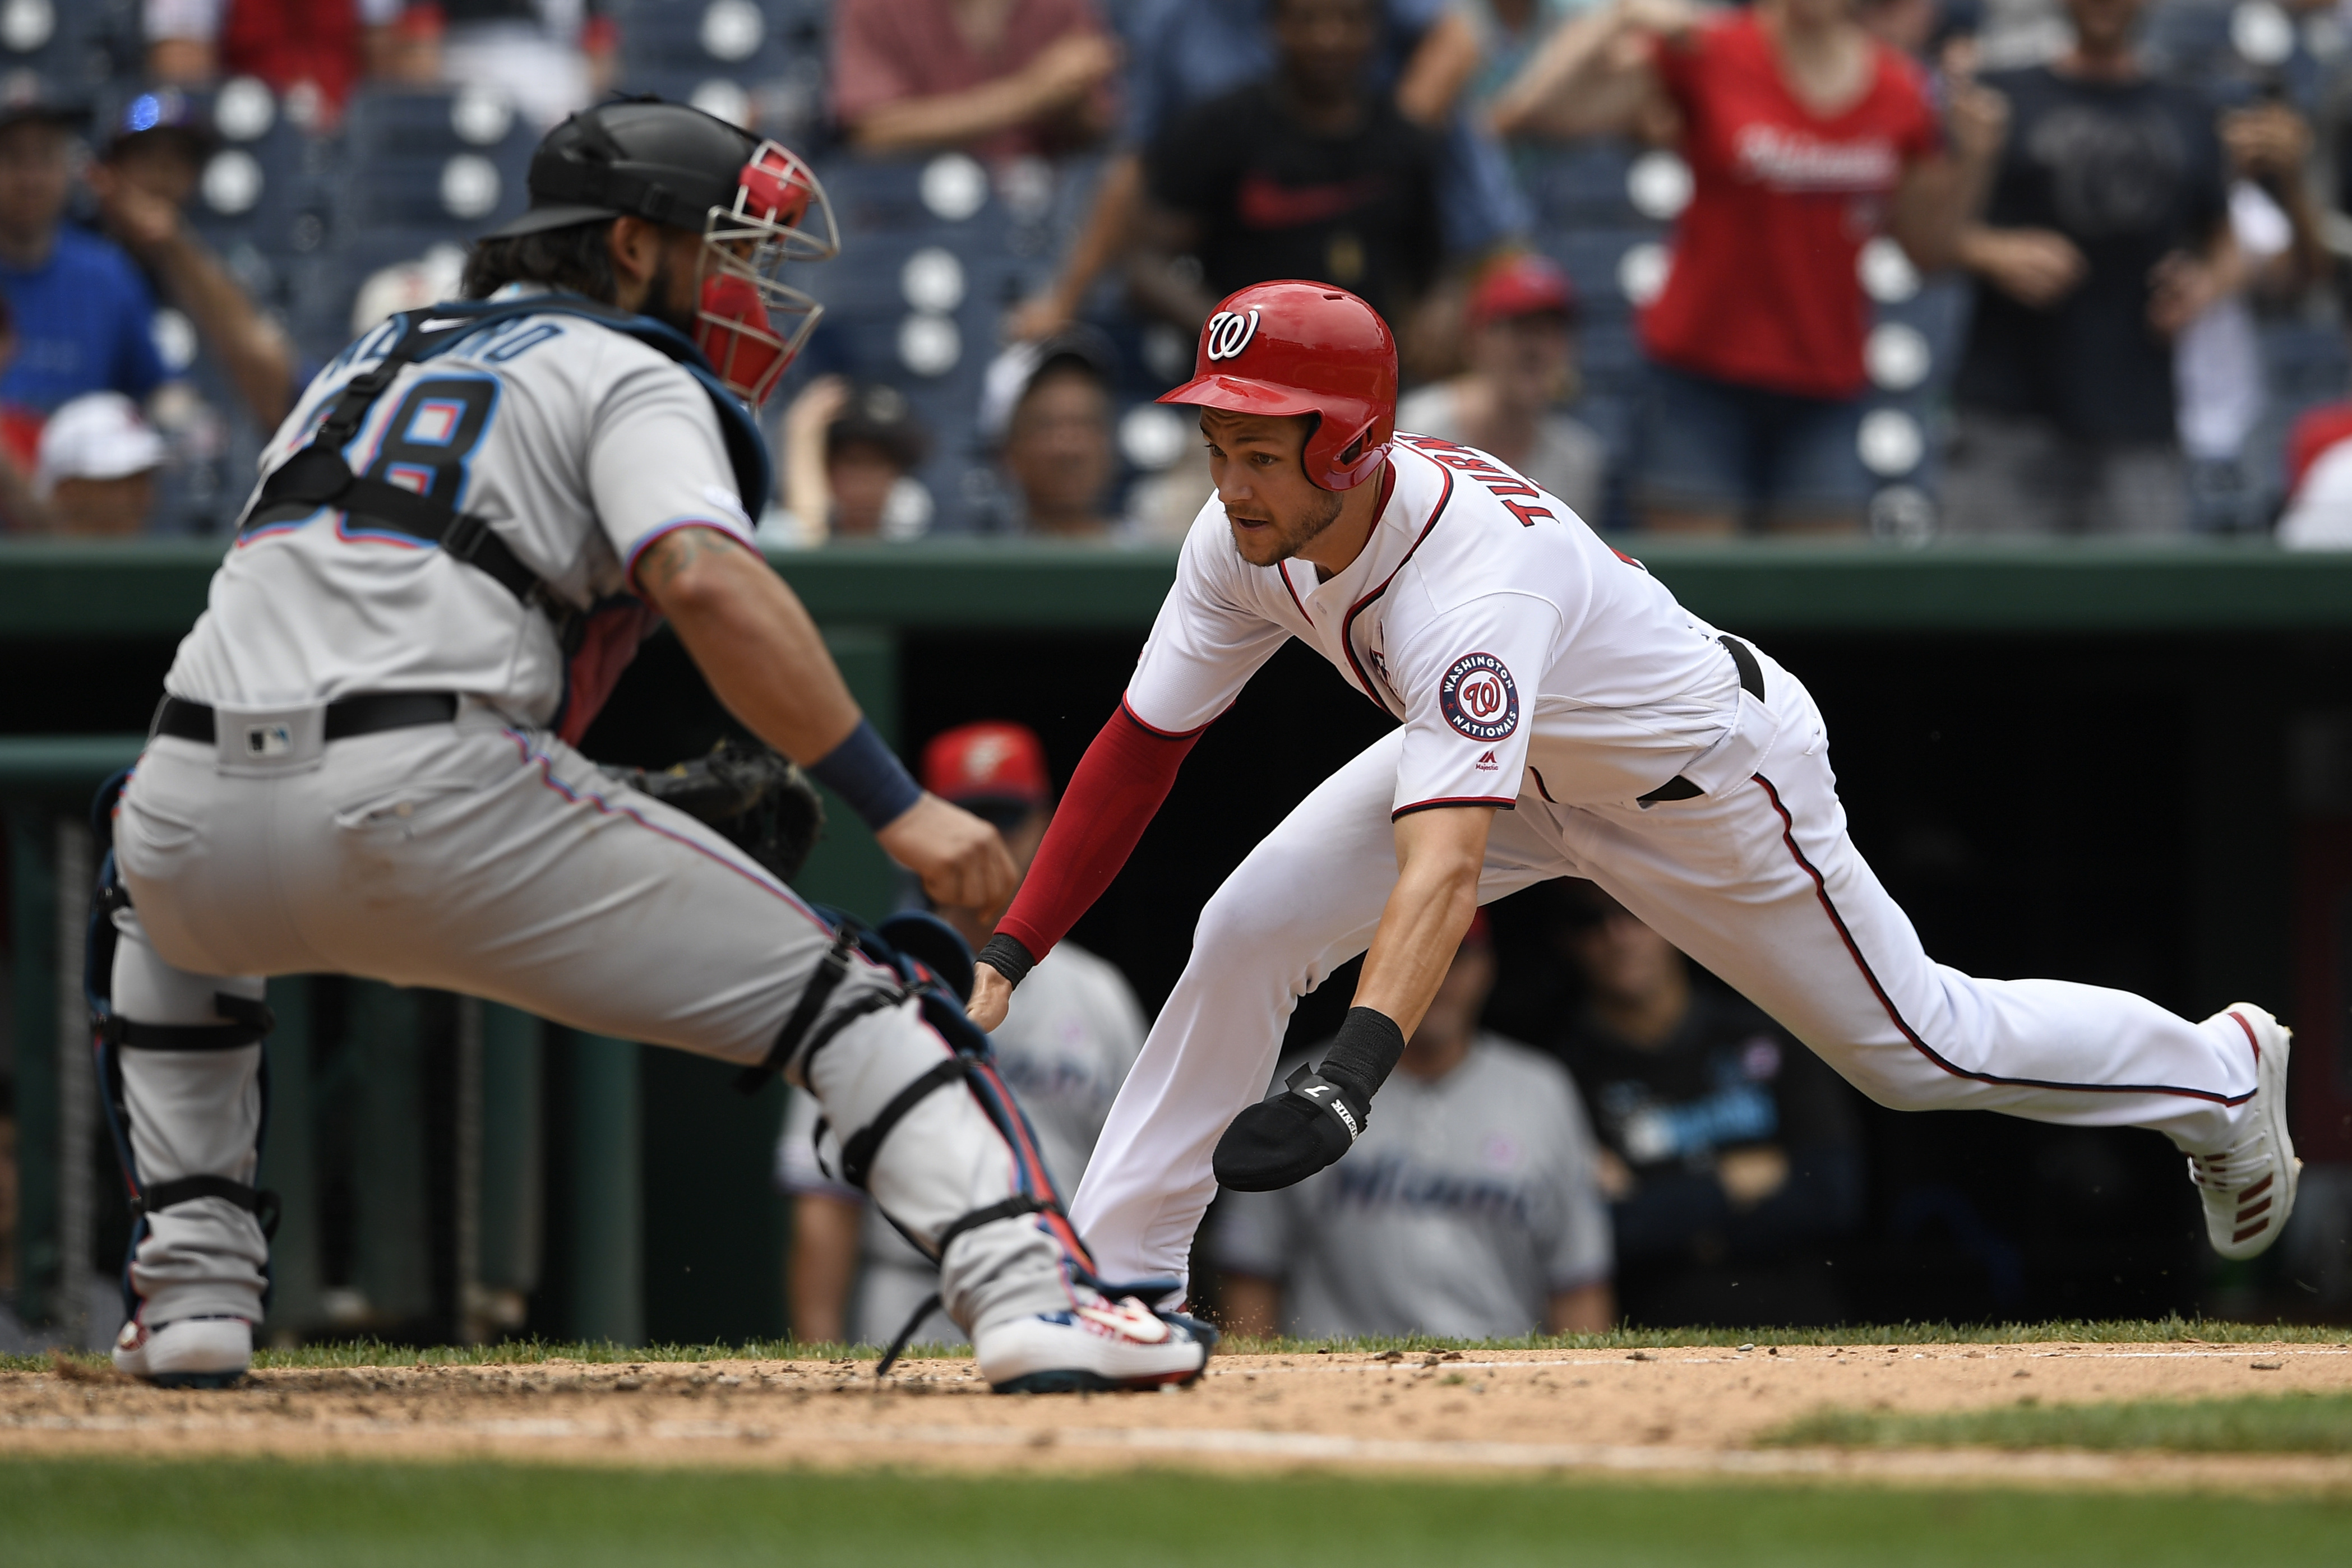 LEADING OFF: Nationals look to stay hot versus Royals